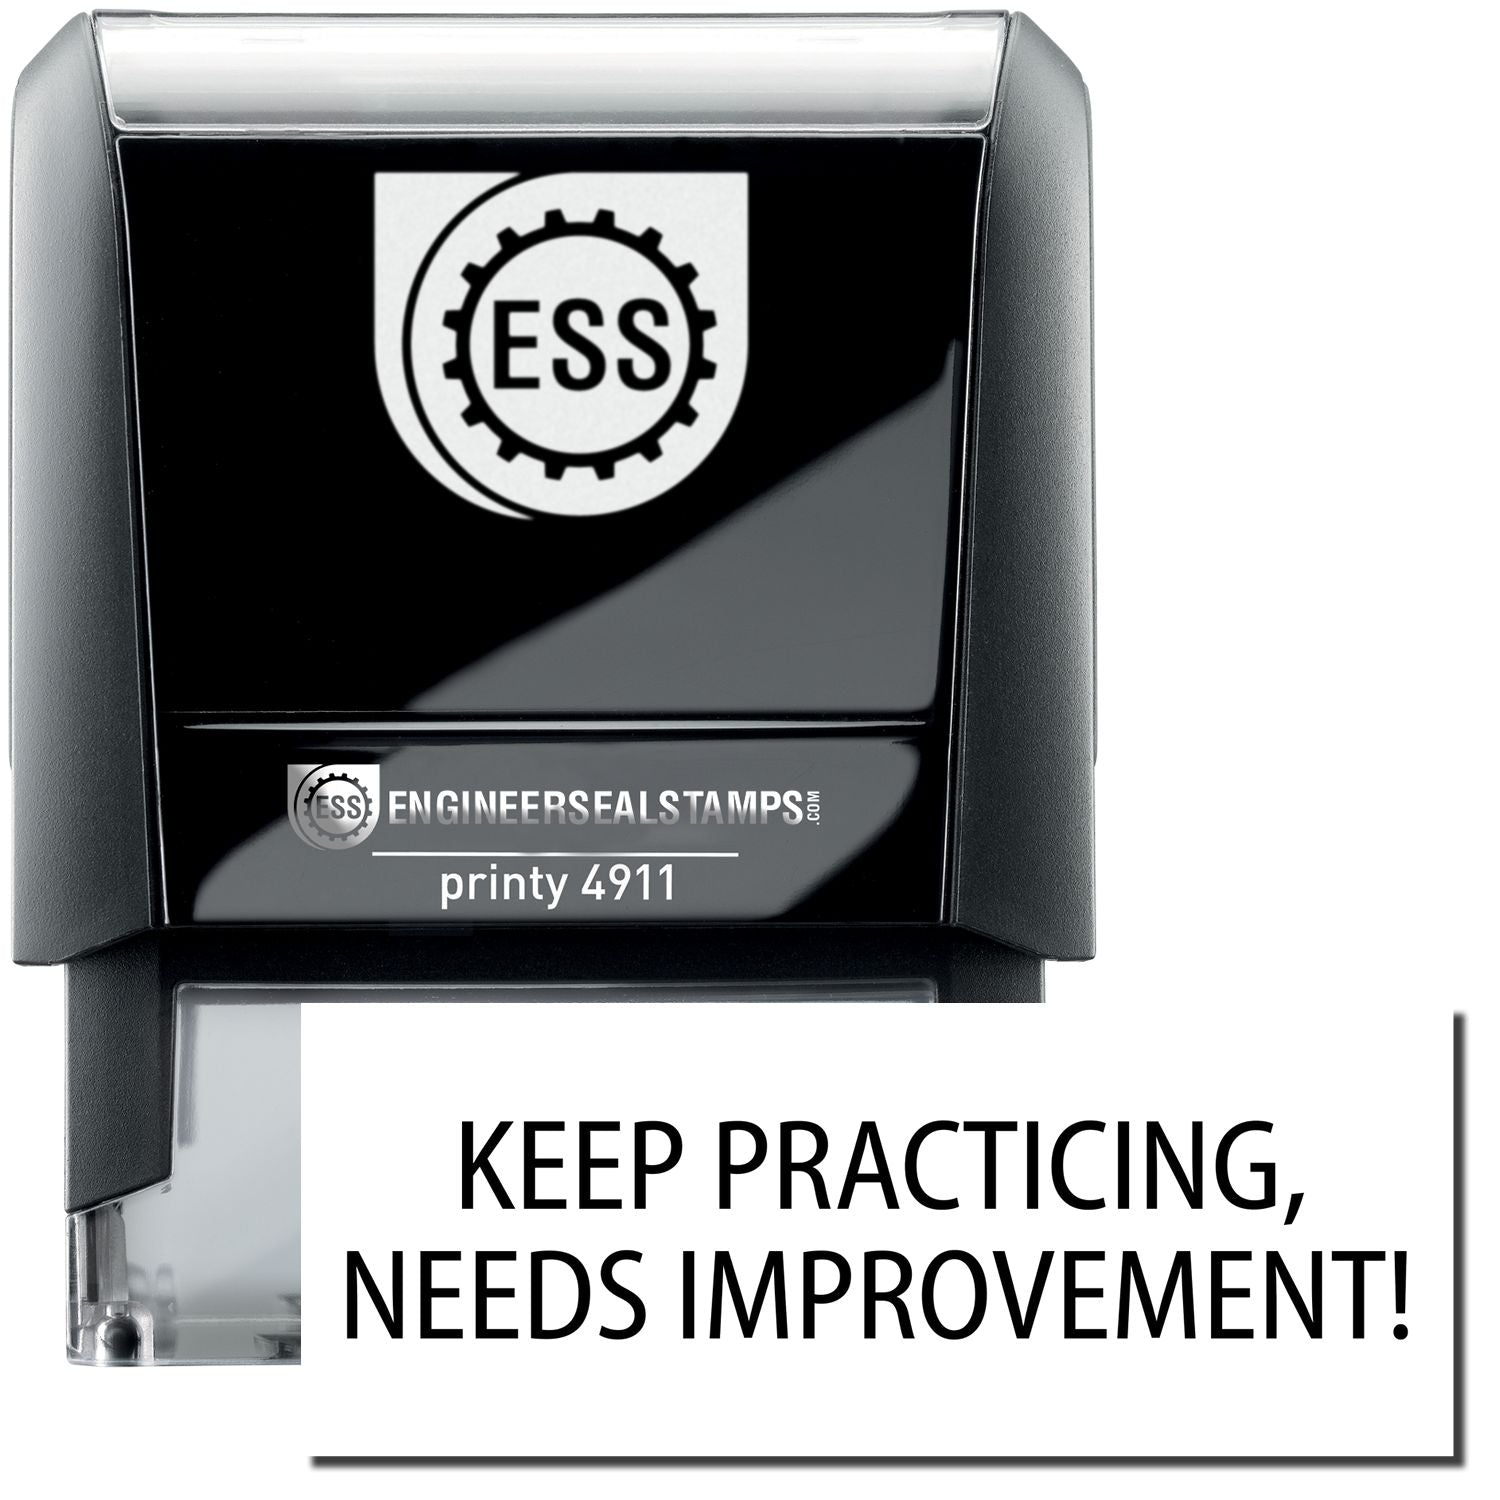 A self-inking stamp with a stamped image showing how the text "KEEP PRACTICING, NEEDS IMPROVEMENT!" is displayed after stamping.